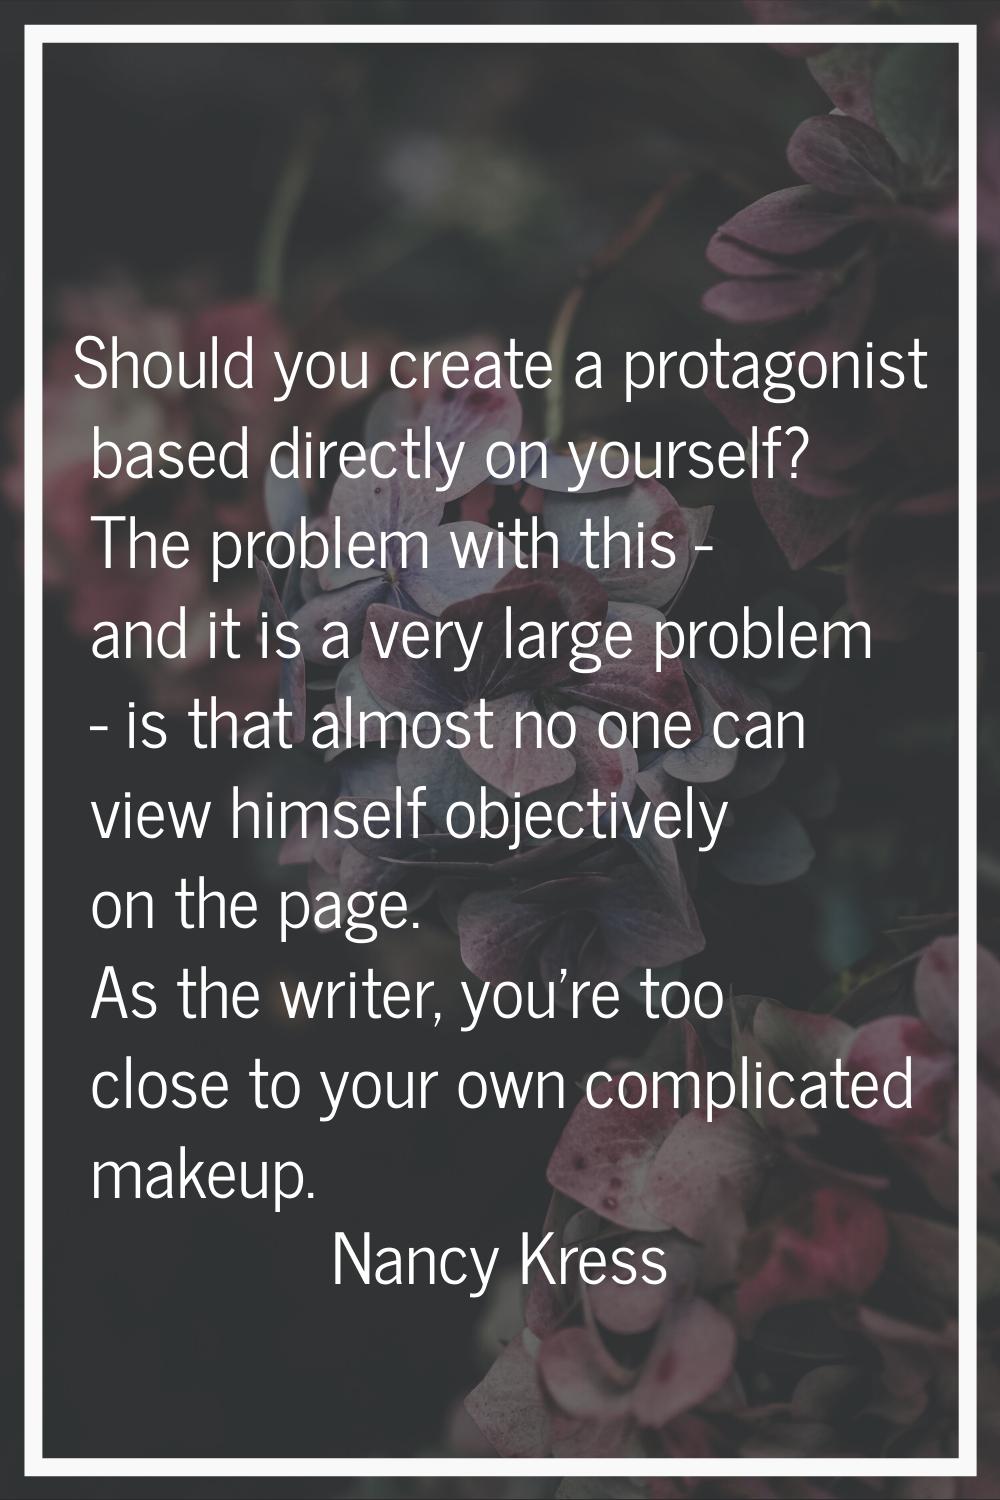 Should you create a protagonist based directly on yourself? The problem with this - and it is a ver